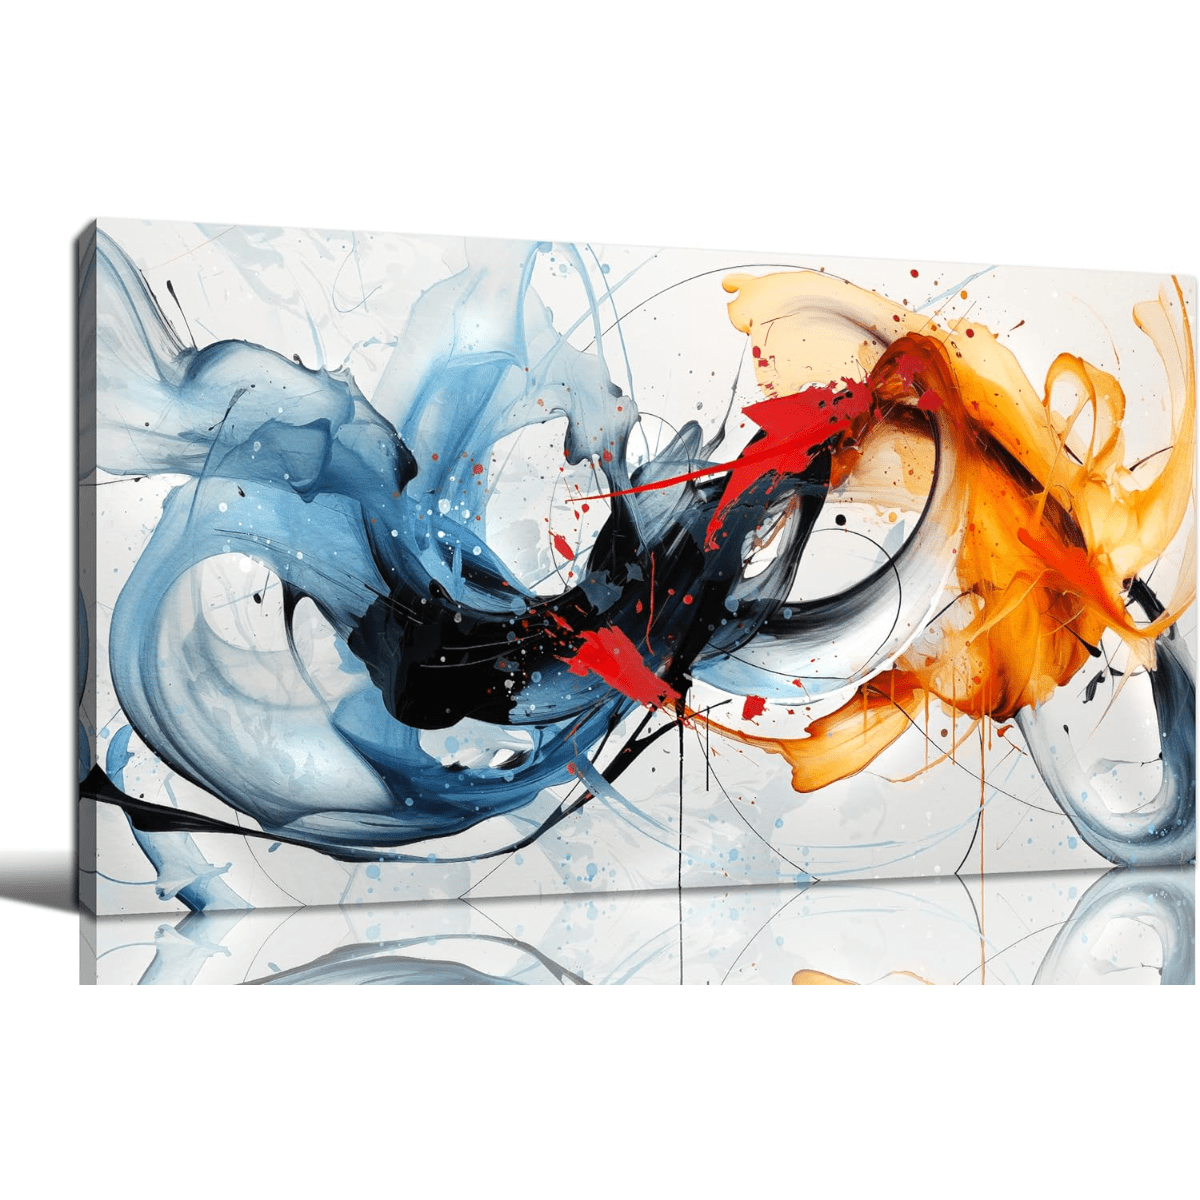 

Blue Abstract Canvas Wall Art Bedroom - Large Wall Art For Living Room Ready To Hang Wooden Frame - Thickness 1.5inch